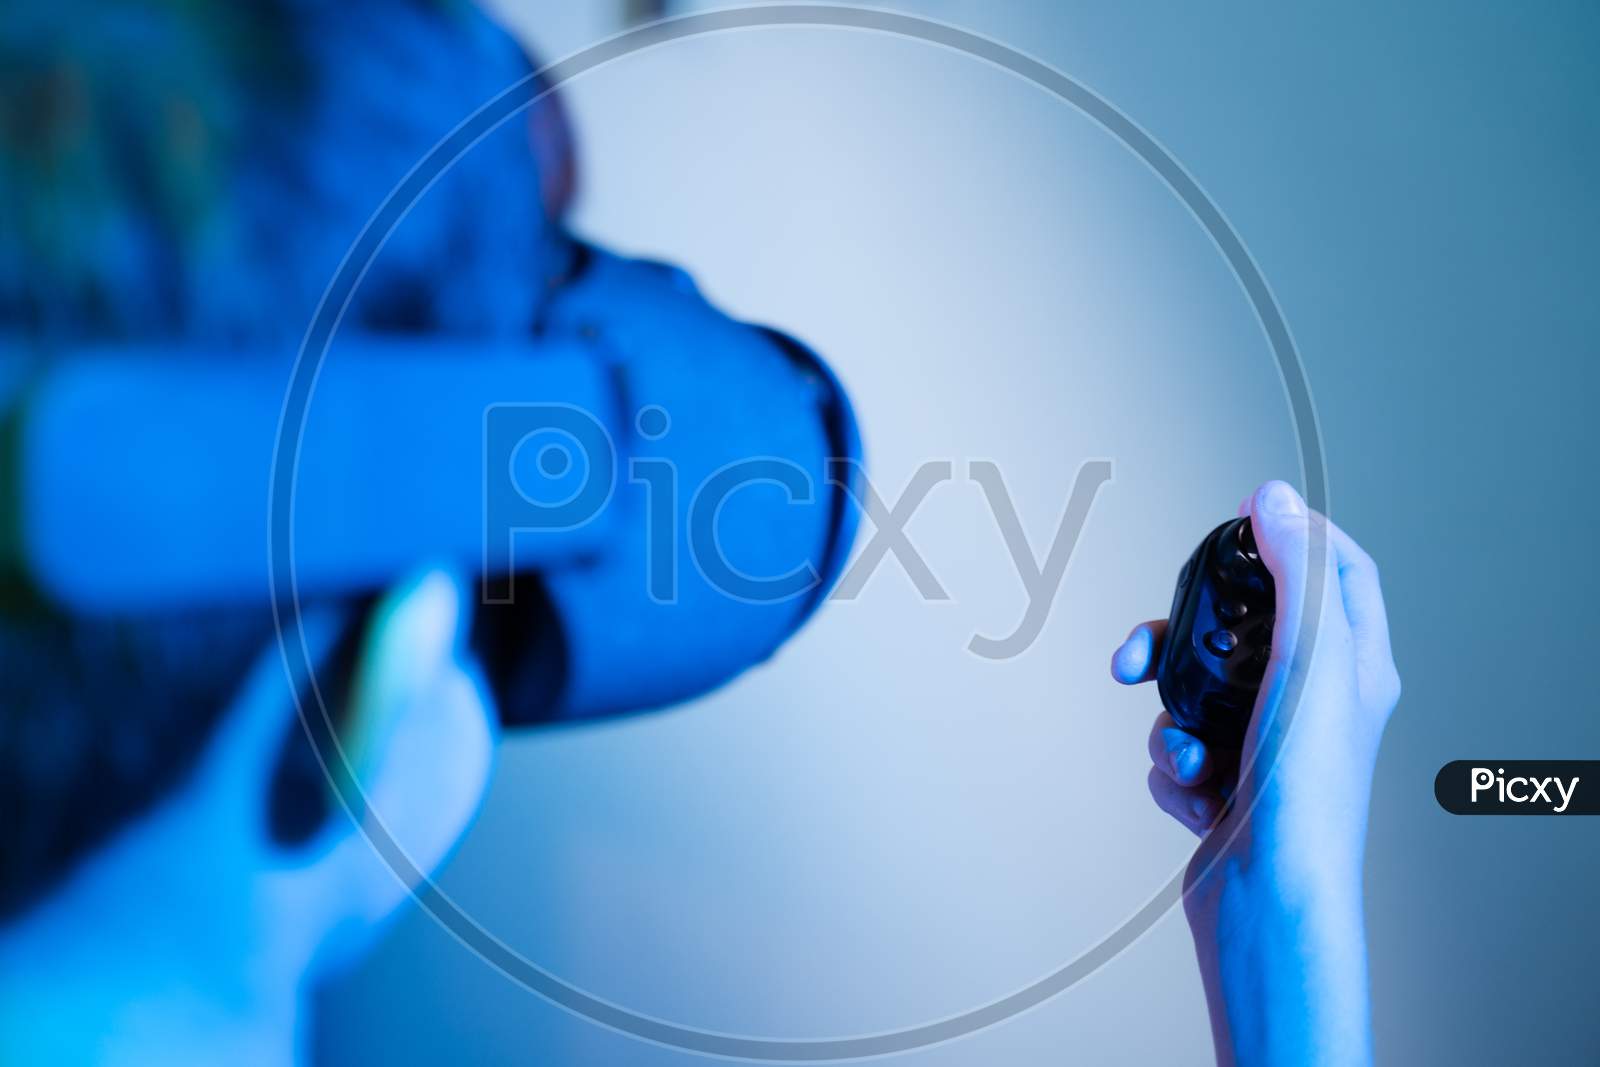 Selective Focus On Joystick, Shoulder Shot Of Kid With Vr Or Virtual Reality Goggles Playing Video Game Using Gampad Or Joystick Showing With Futuristic Lighting Look.